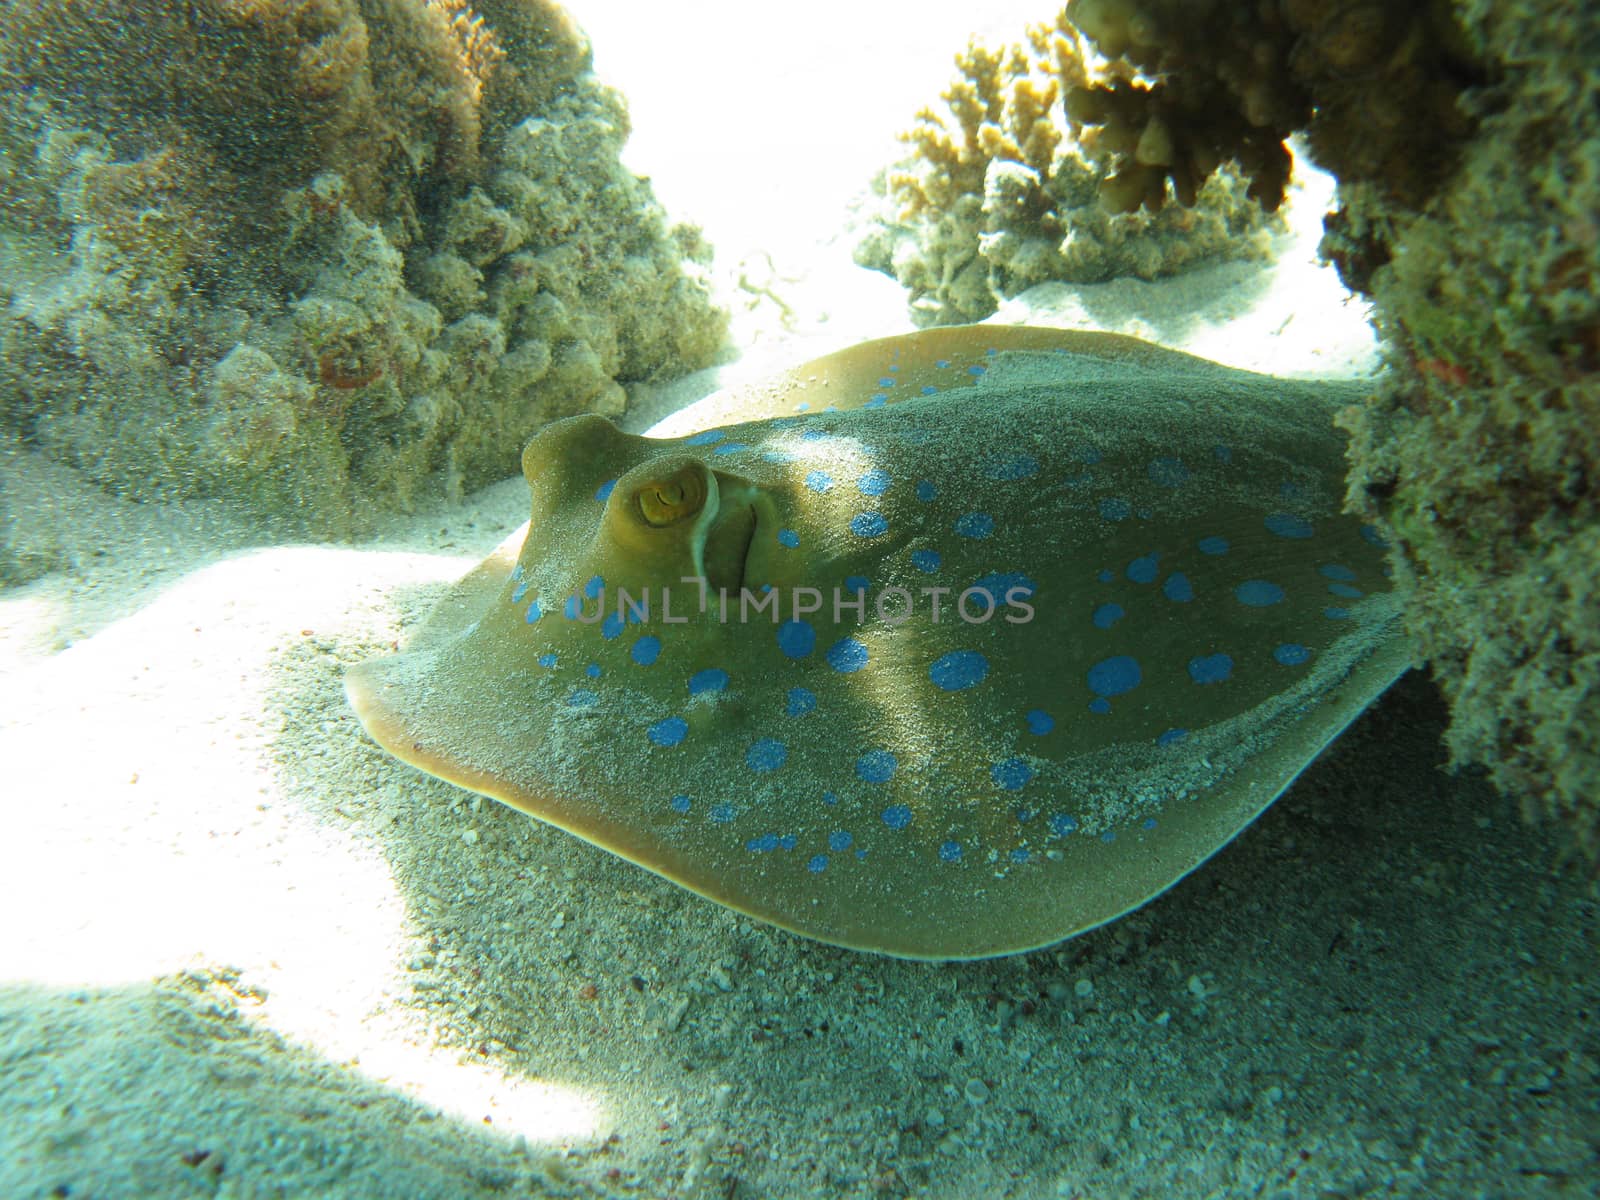 bluespotted ribbontail ray at the bottom of tropical sea on the sand - underwater